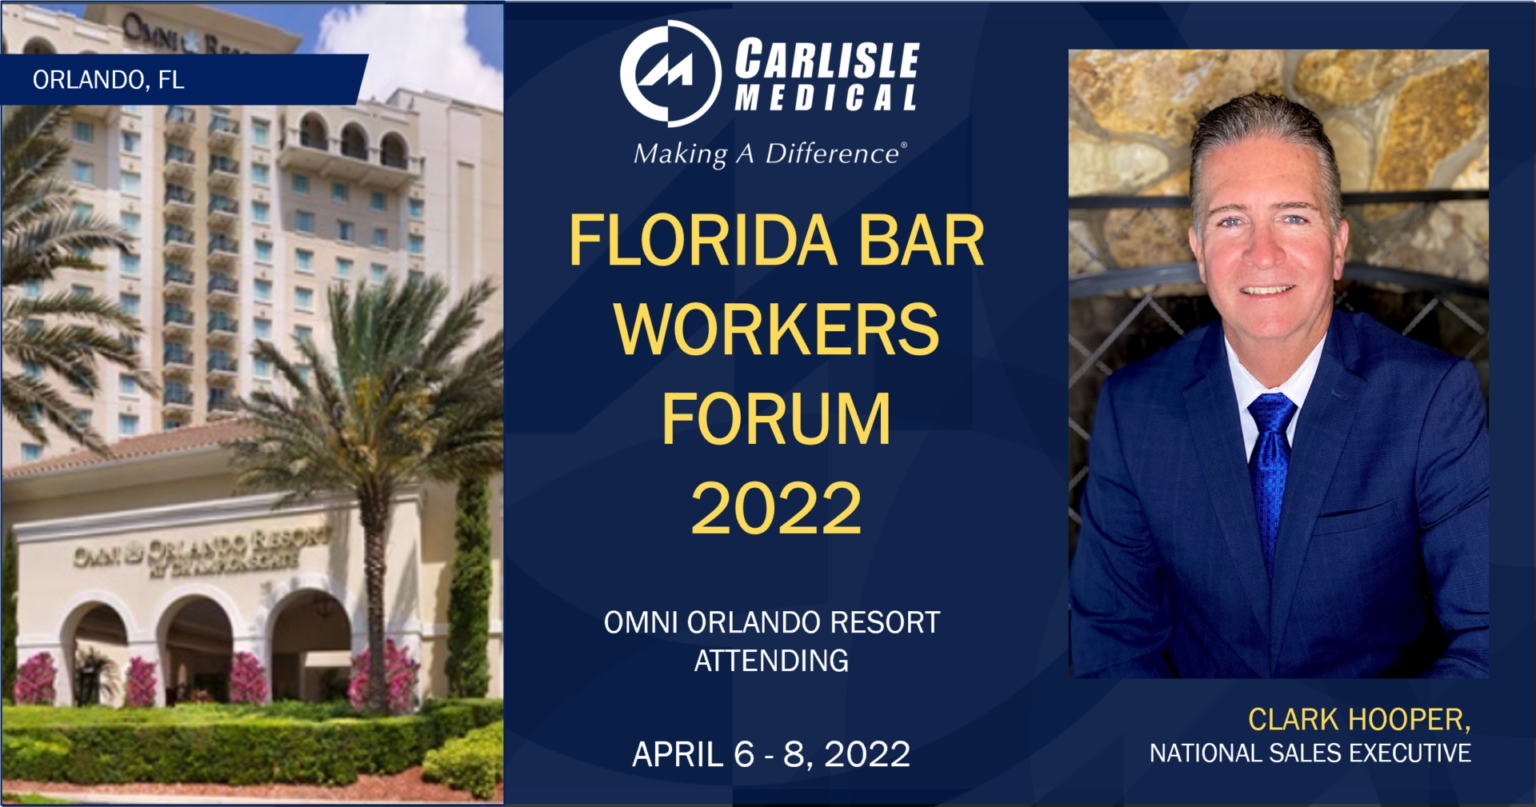 Carlisle Medical Will Be Attending The Florida Bar Workers Forum 2022